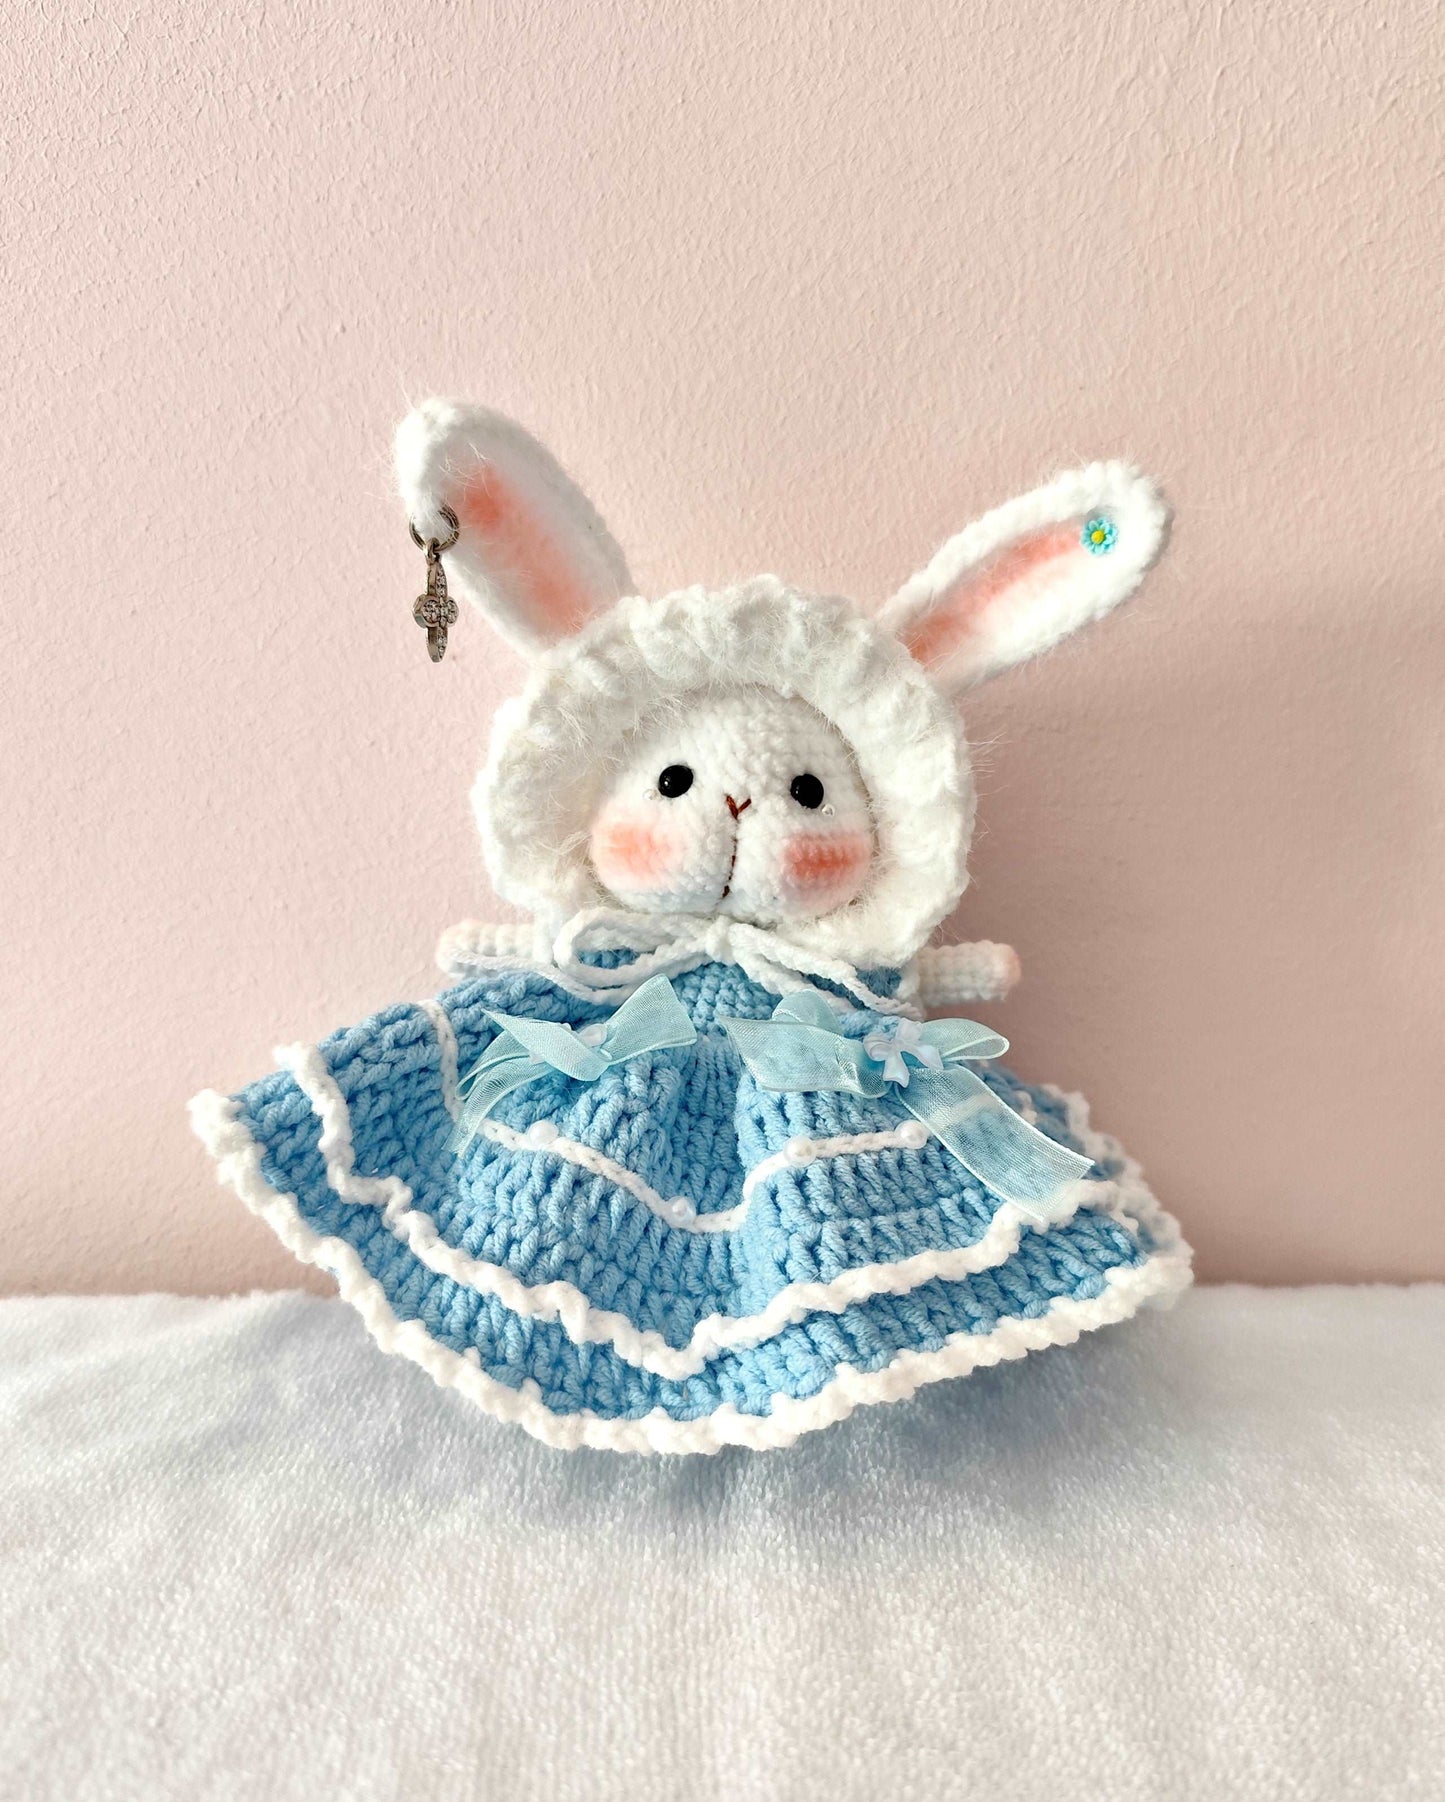 Exquisite Crocheted Bunny Toy for Collectors and Enthusiasts